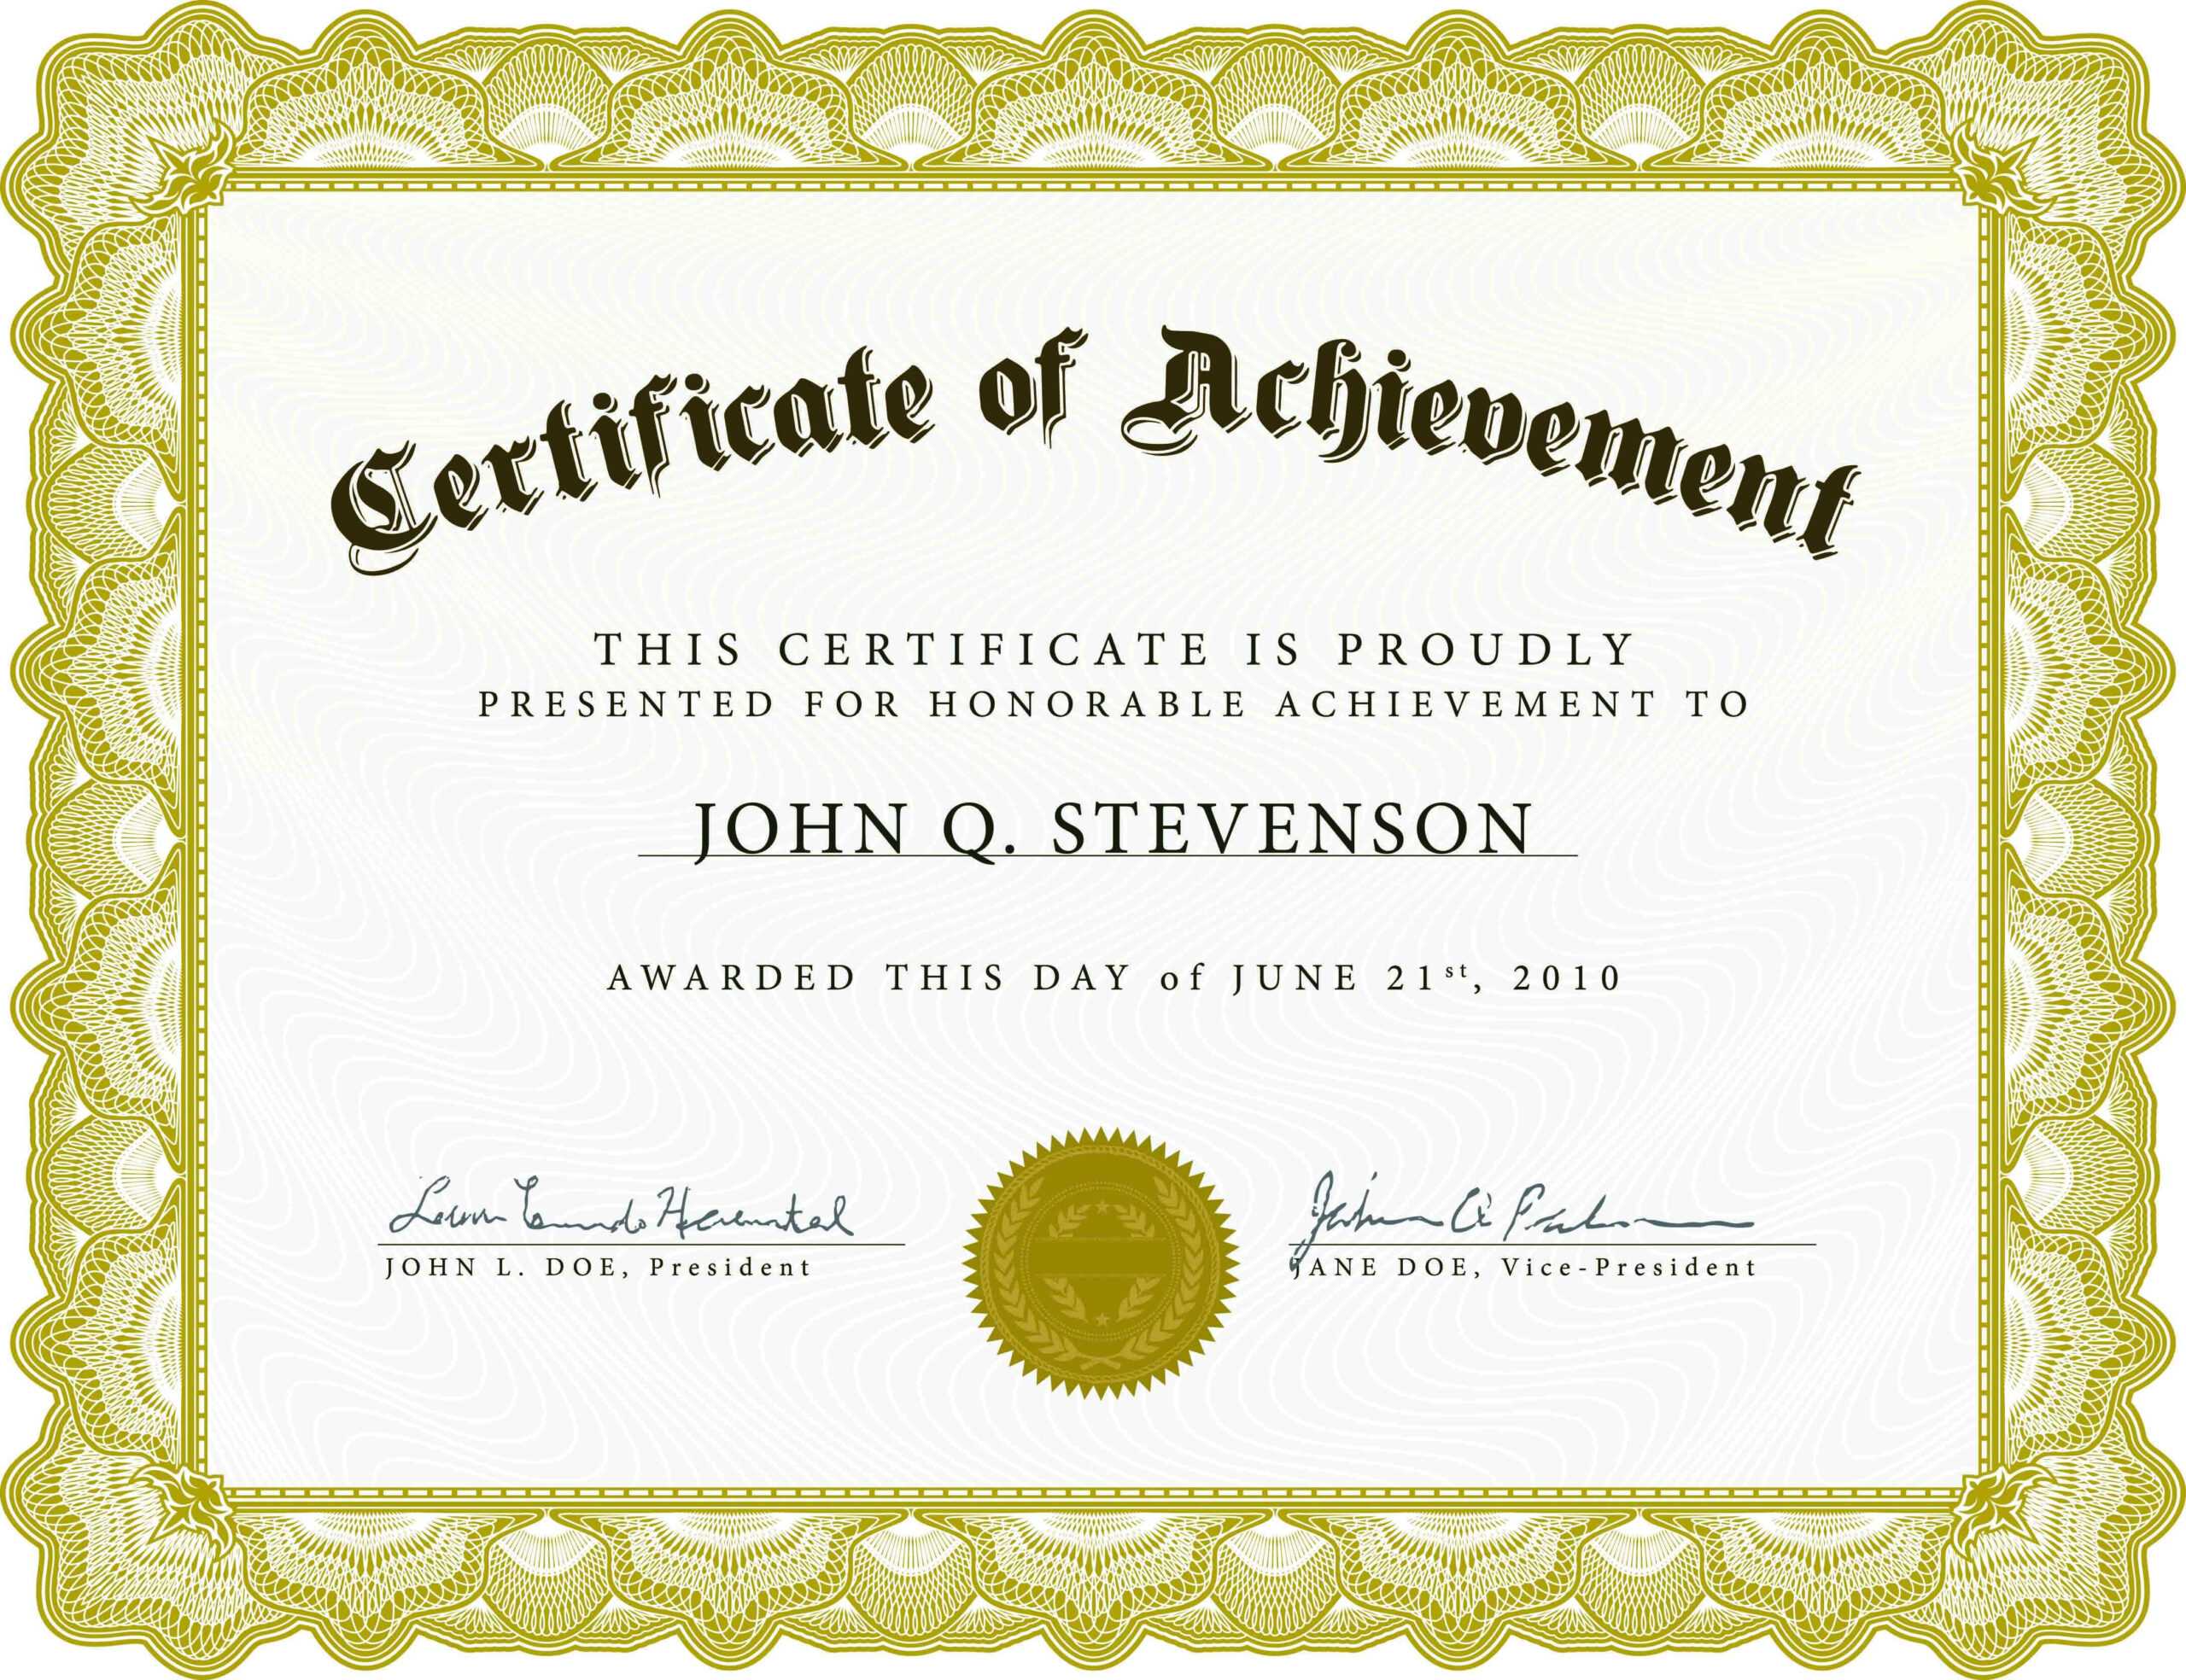 Employee Of The Month Certificate Sample – Calep.midnightpig.co For Employee Of The Month Certificate Templates